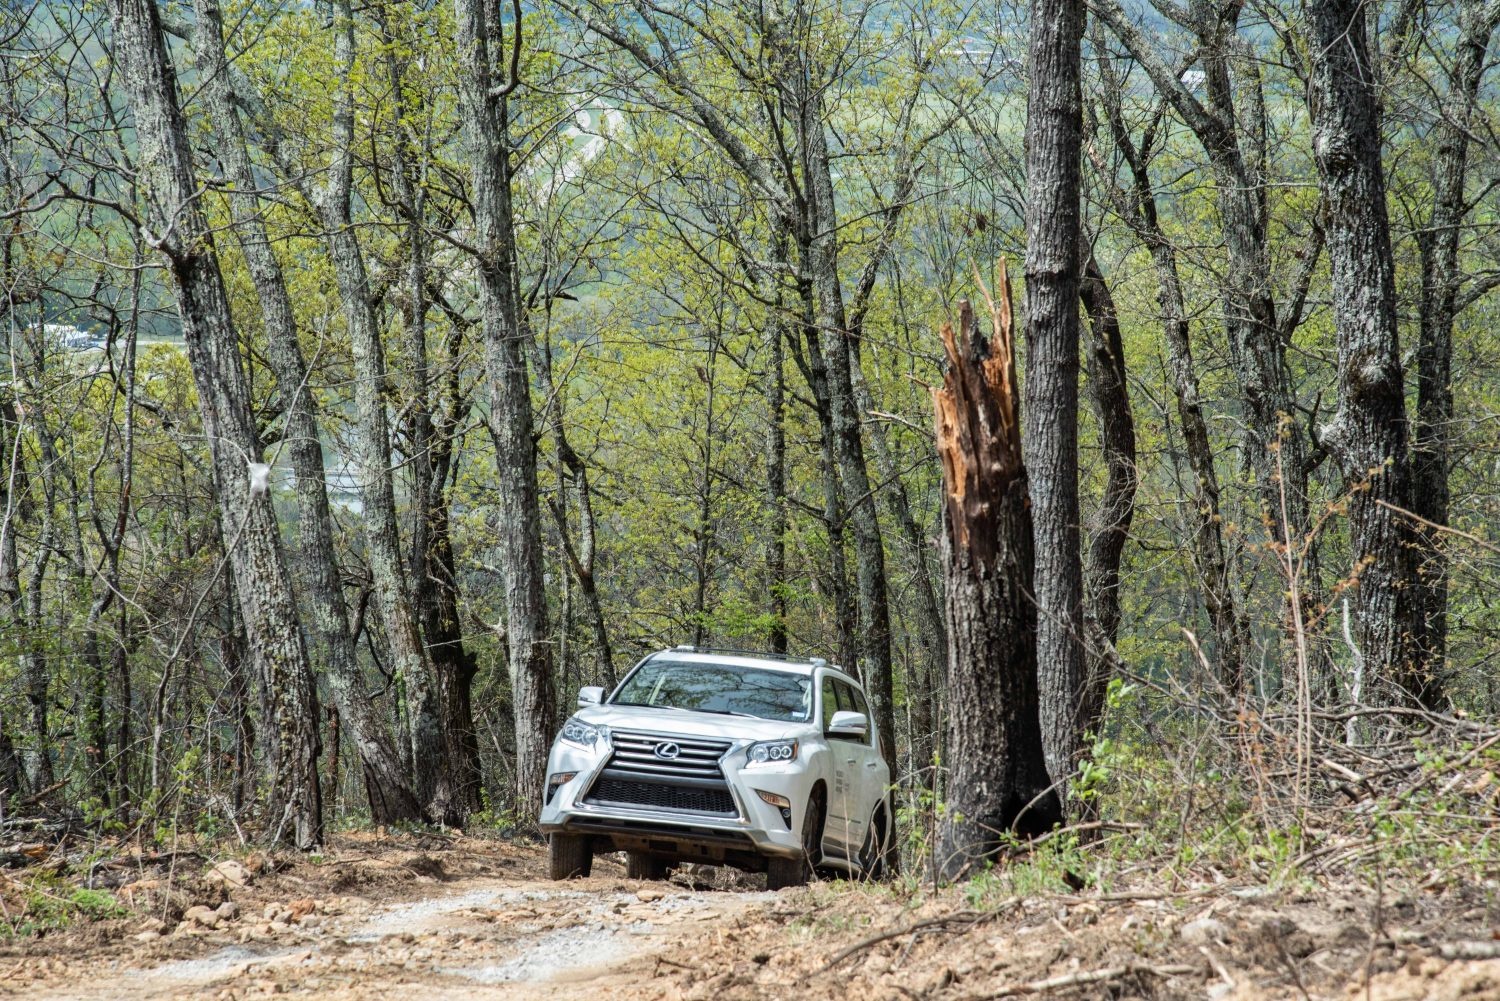 Lexus GX SUVs take to the trails at Blackberry Mountain, a luxury resort in the Great Smokey Mountains.